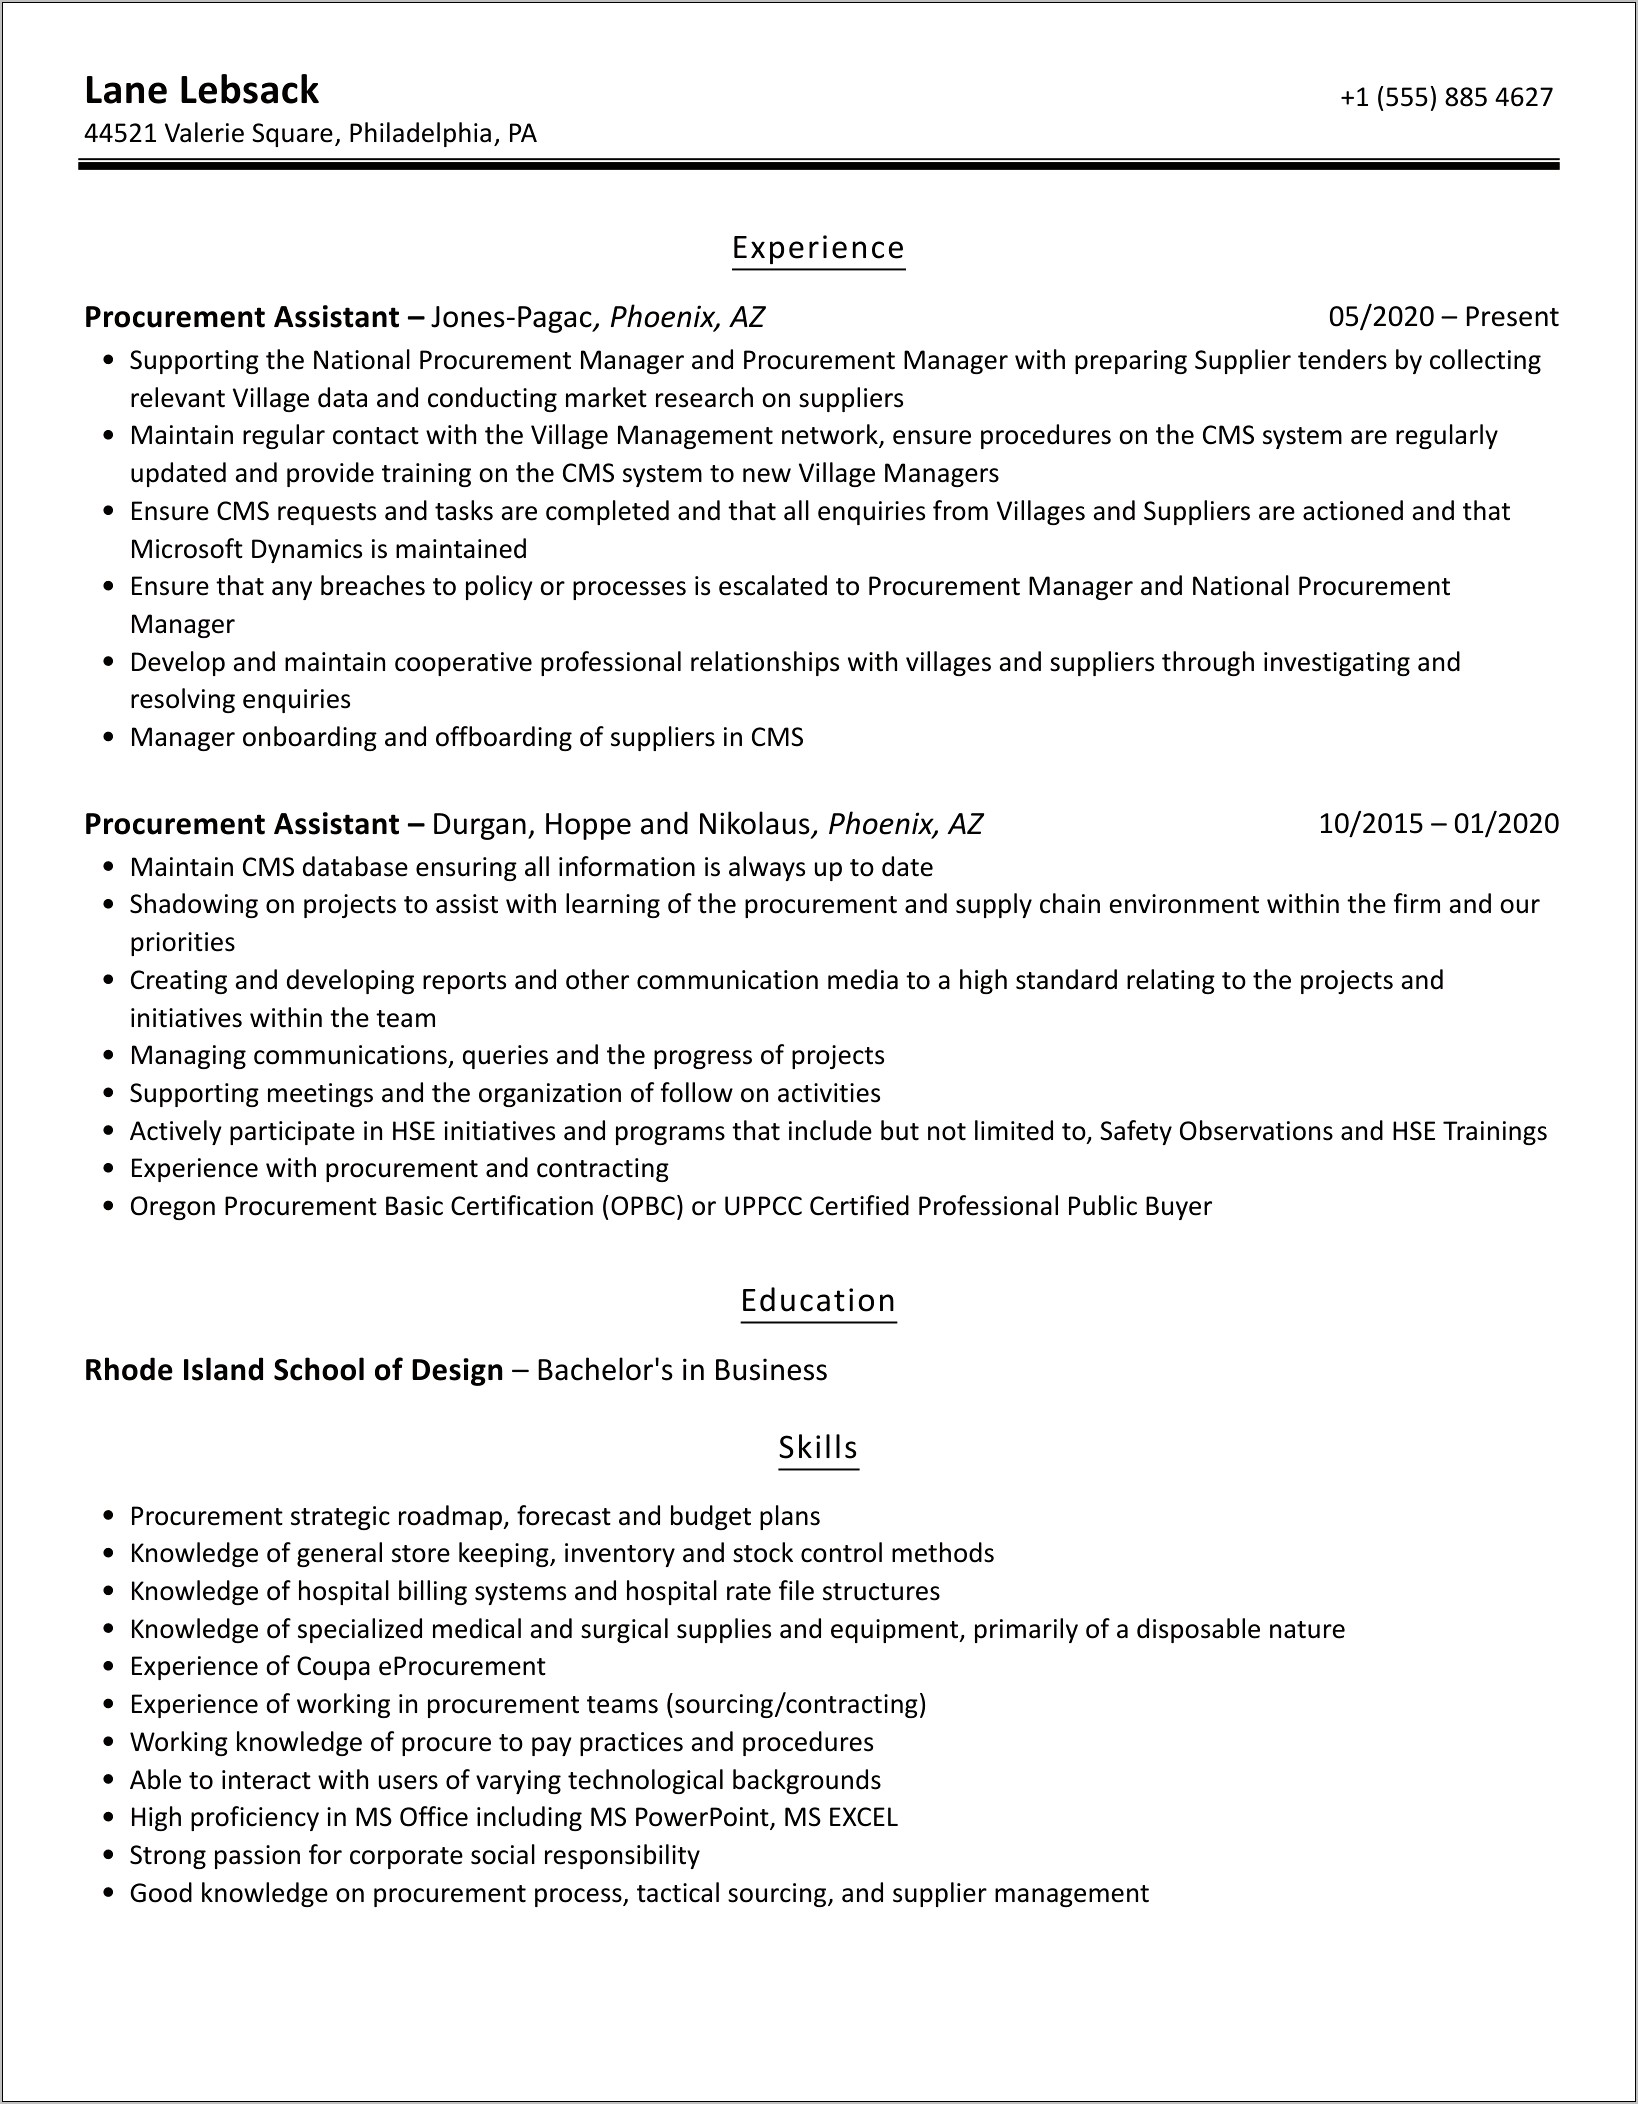 Resume Examples For Purchasing Assistant